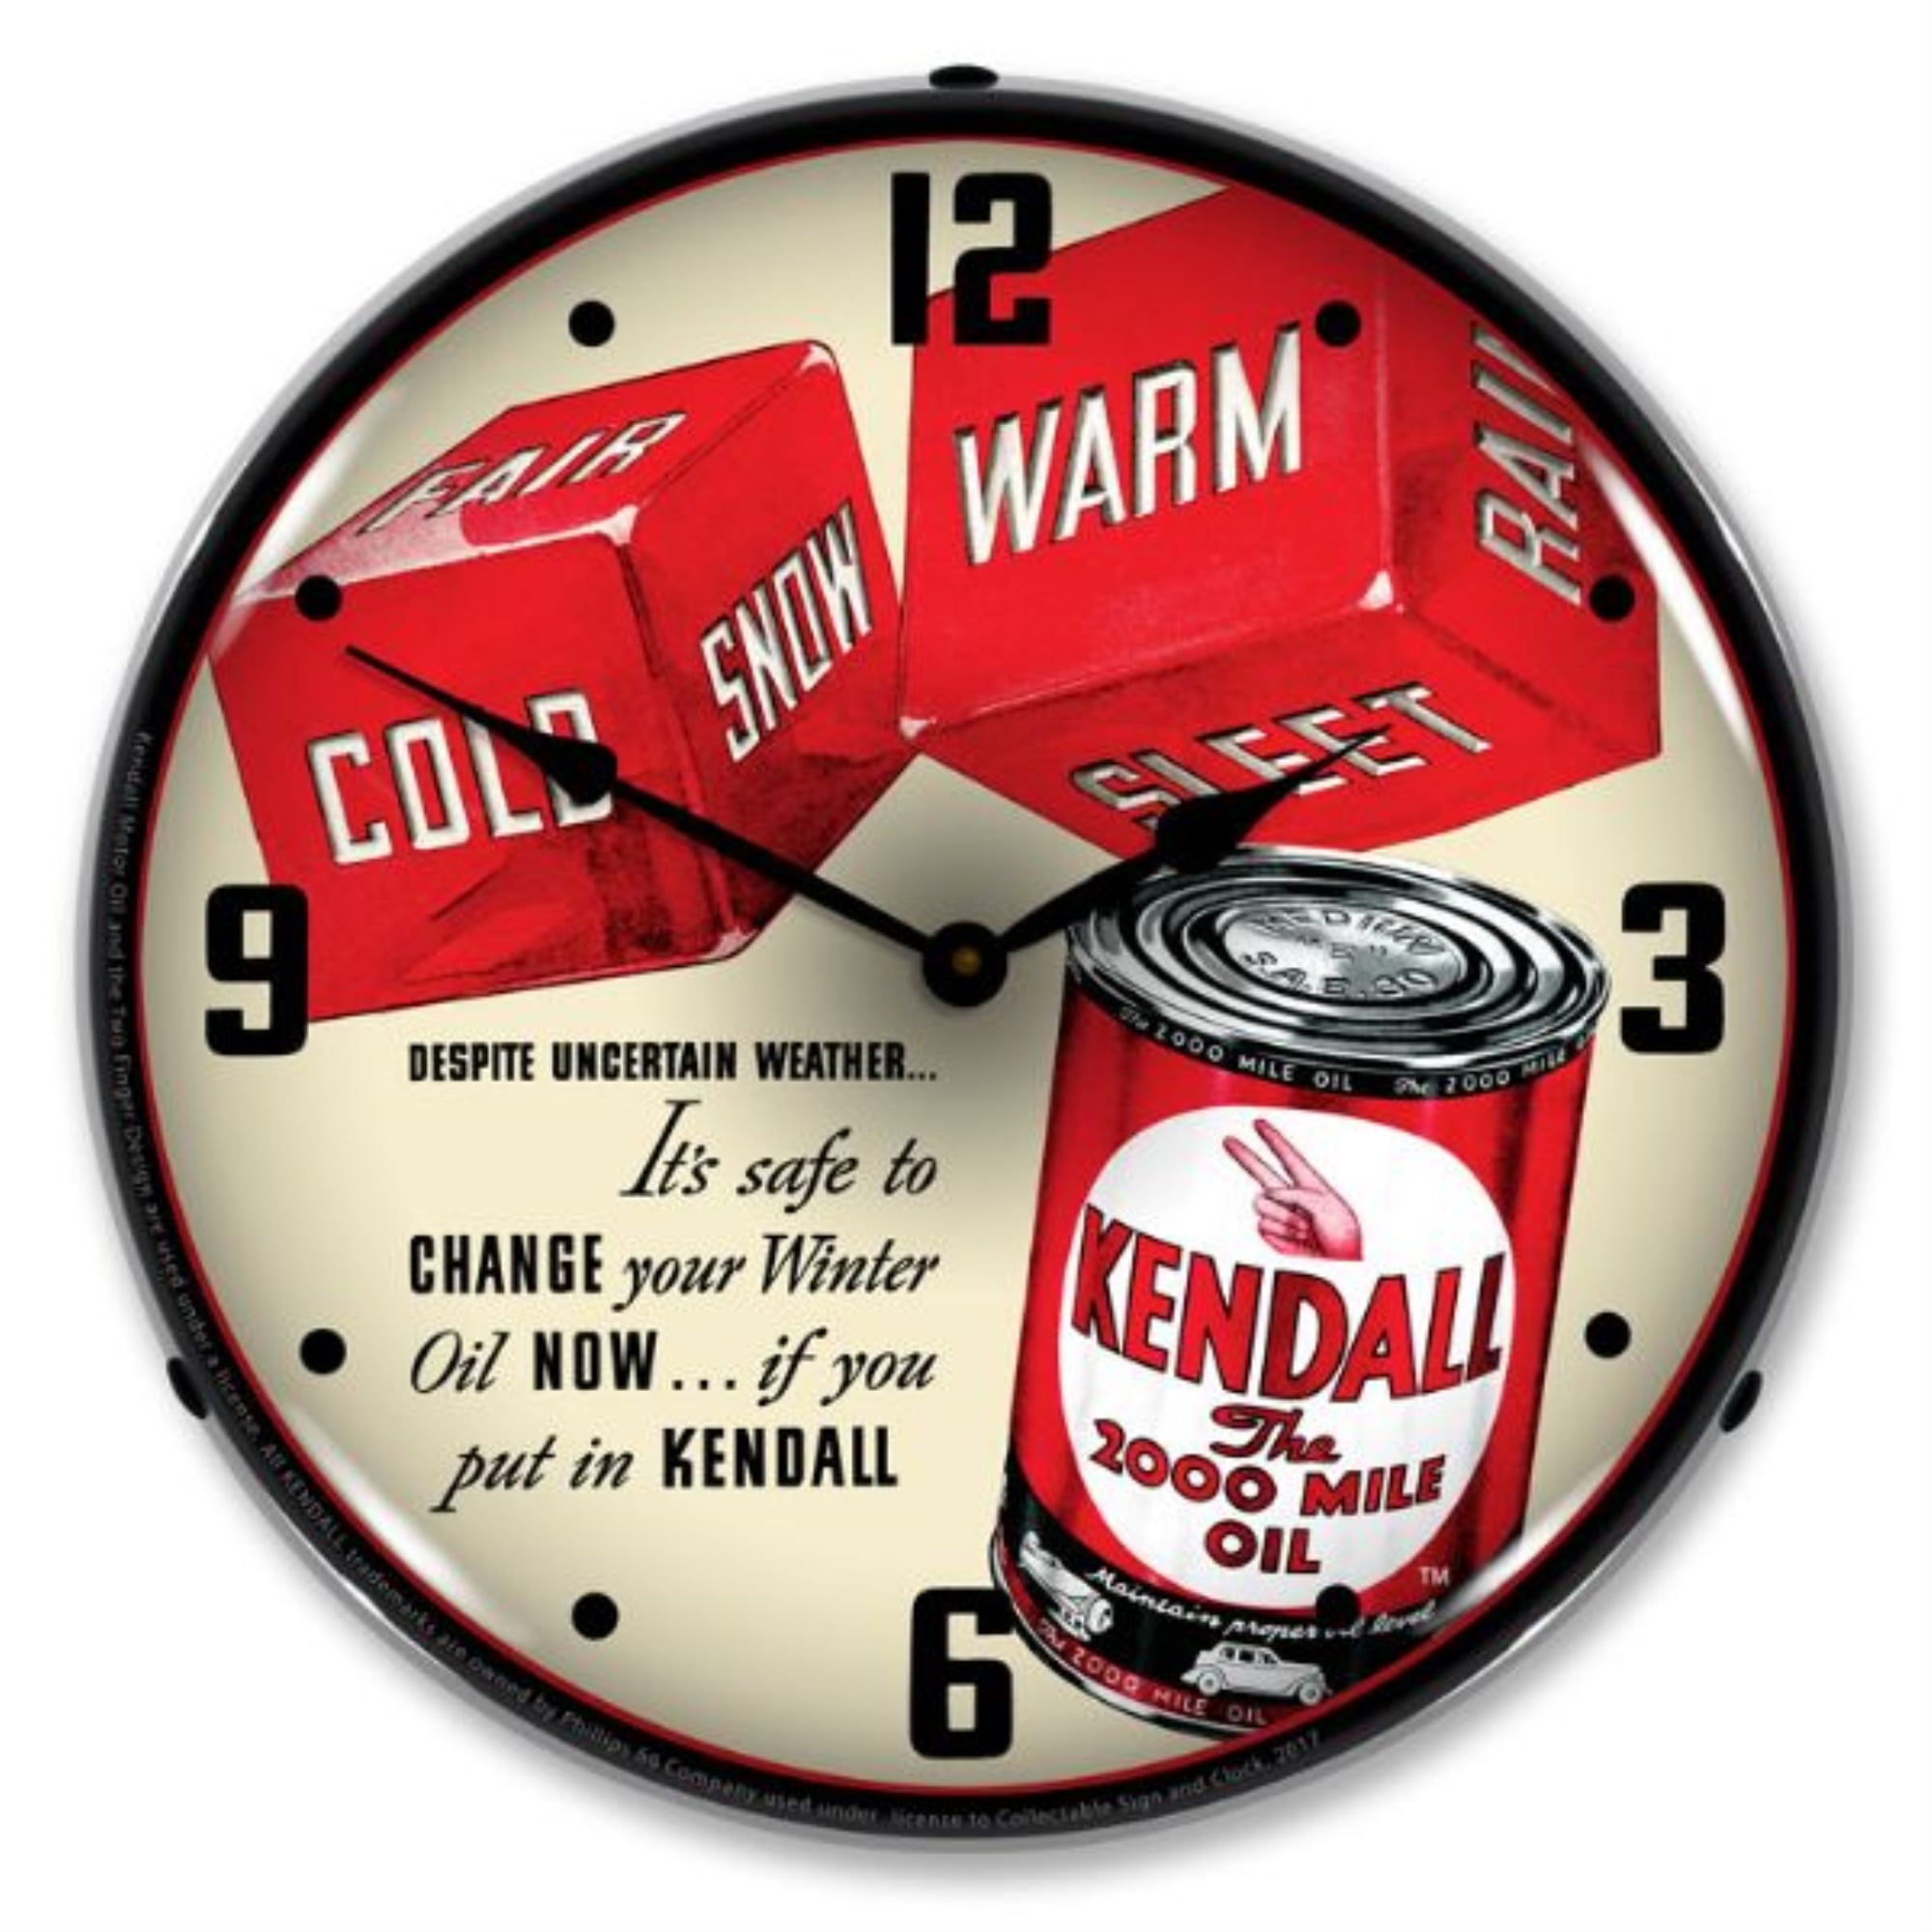 TIN SIGN "Kendall" Gas Oil Garage Red Rustic Wall Decor 